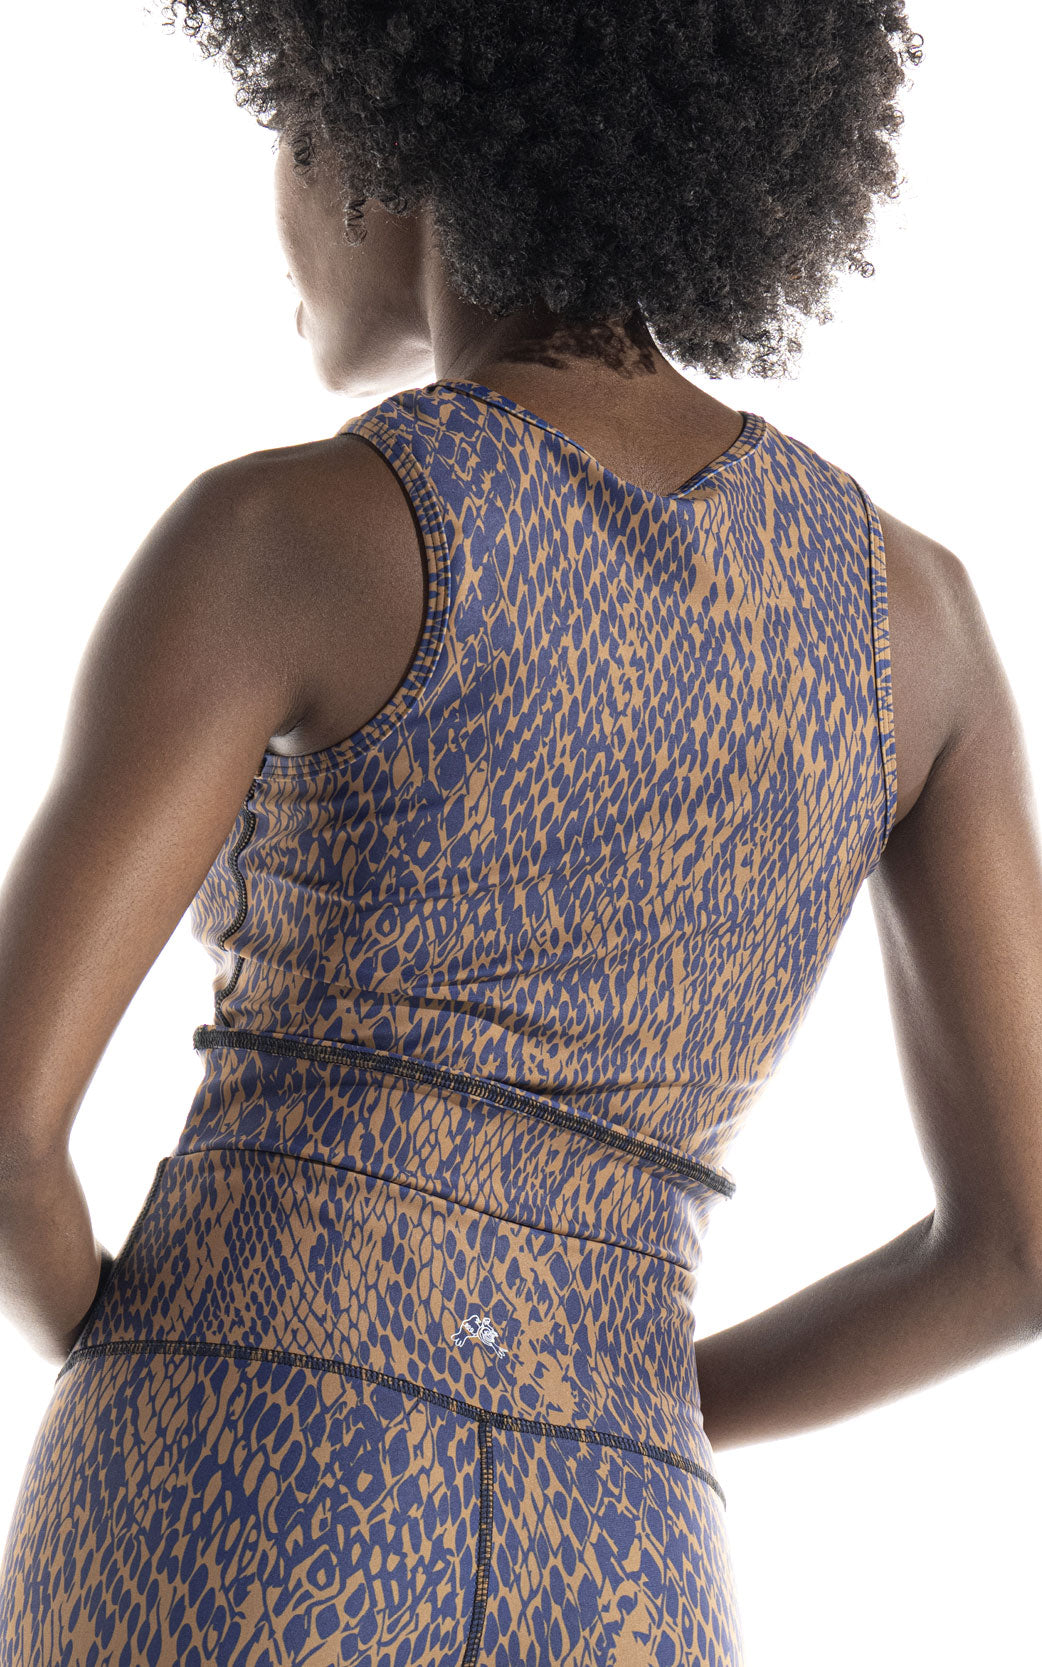 Women's active set in printed skin print. Trending colors Navy and Gold make this a fashion forward sophisticated set to wear for yoga, pilates, running, spinning or any activity. Full length legging has a 26" Inseam and tank is slightly cropped and fitted. Super comfortable